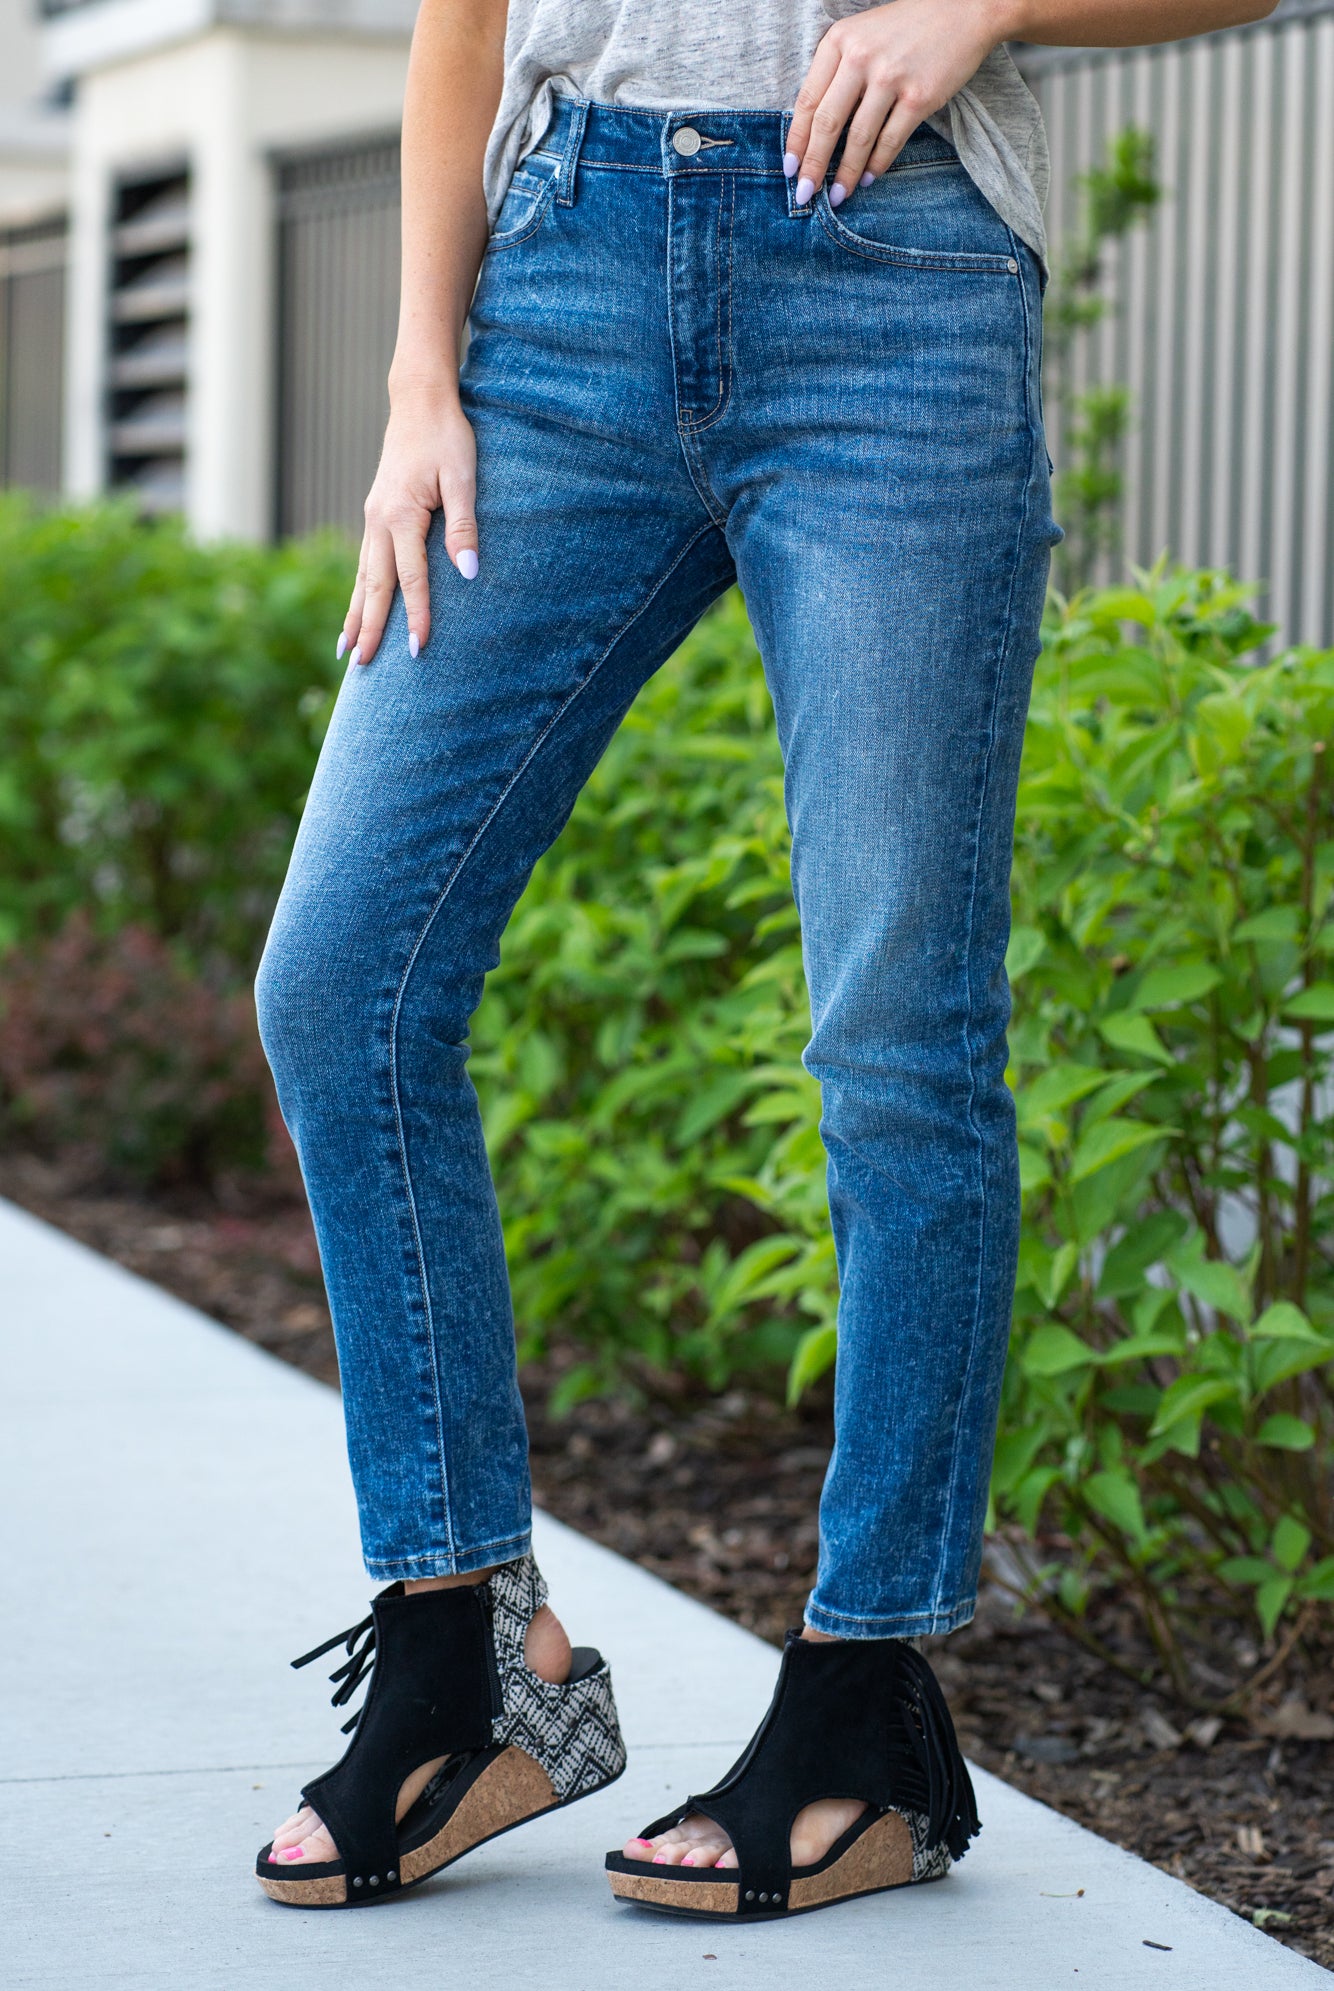 KanCan Jeans  With a high waist and cigarette straight fit, these will be your go-to jeans that will never go out of style. Color: Medium Blue  Cut: Straight Fit, 28" Inseam* Rise: High-Rise, 11" Front Rise* 99% Cotton 1% Spandex  Fly: Zipper Style #: KC4009D Contact us for any additional measurements or sizing.  *Measured on the smallest size, measurements may vary by size.